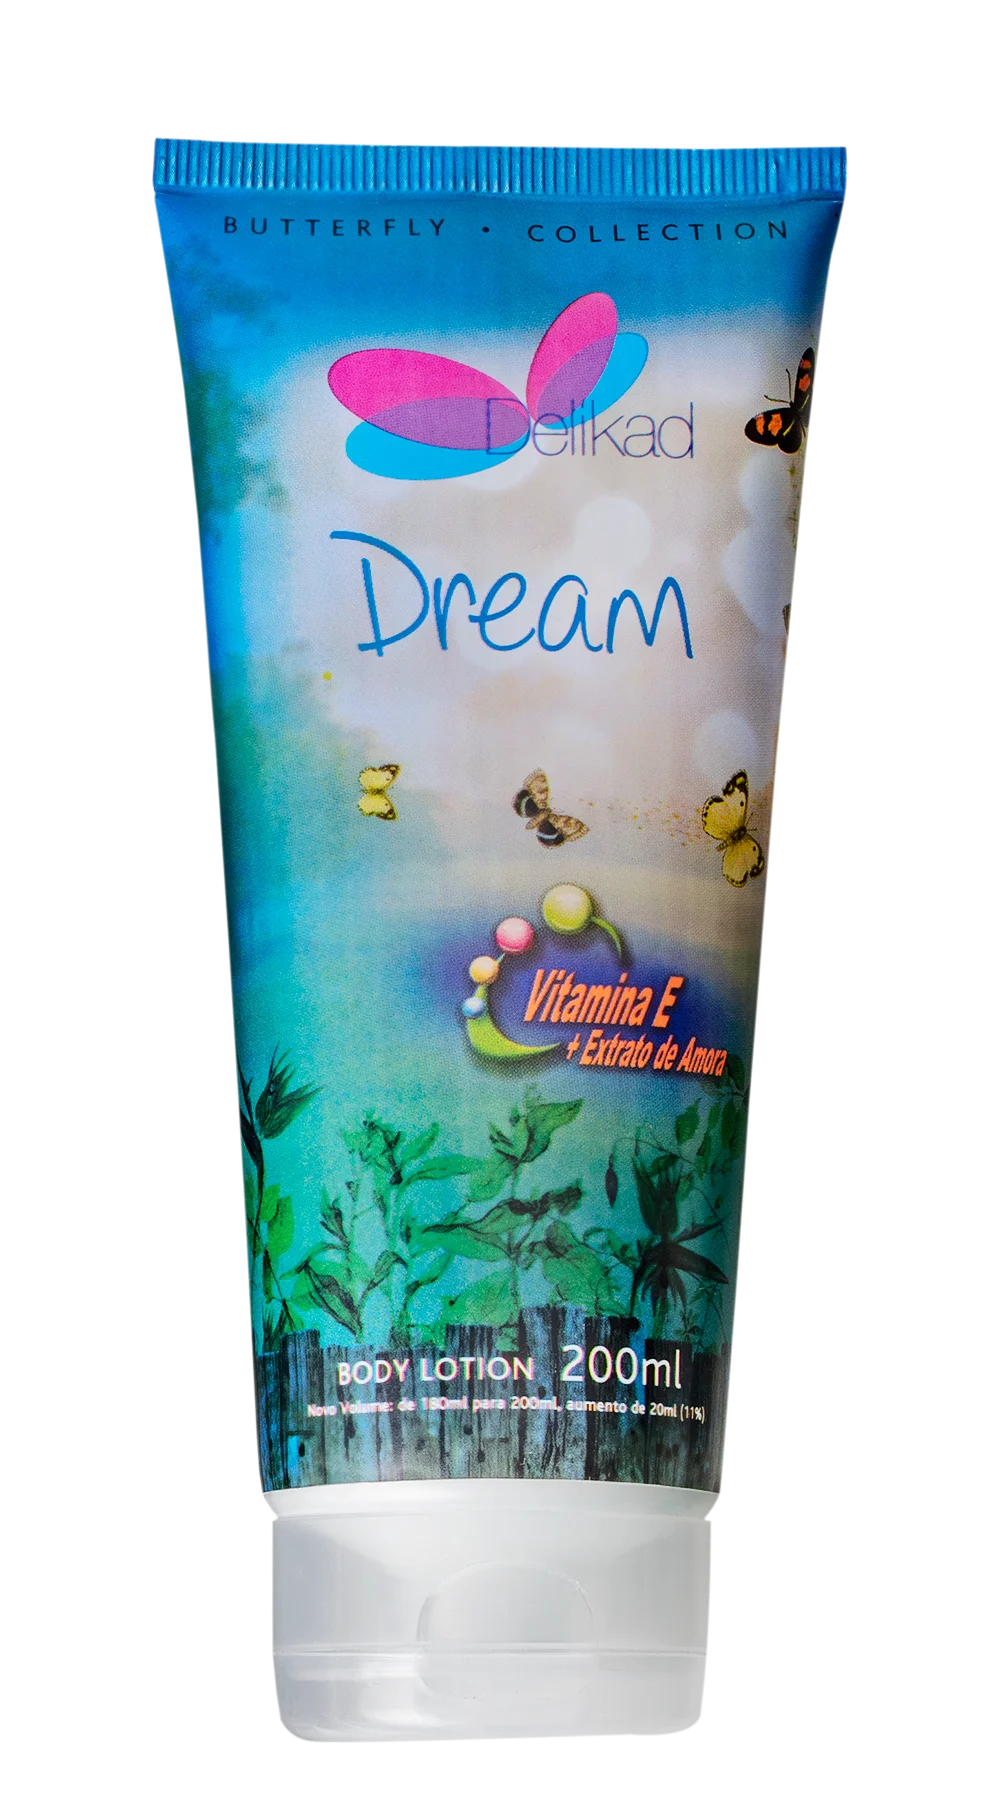 Delikad Butterfly Collection Body Lotion Dream